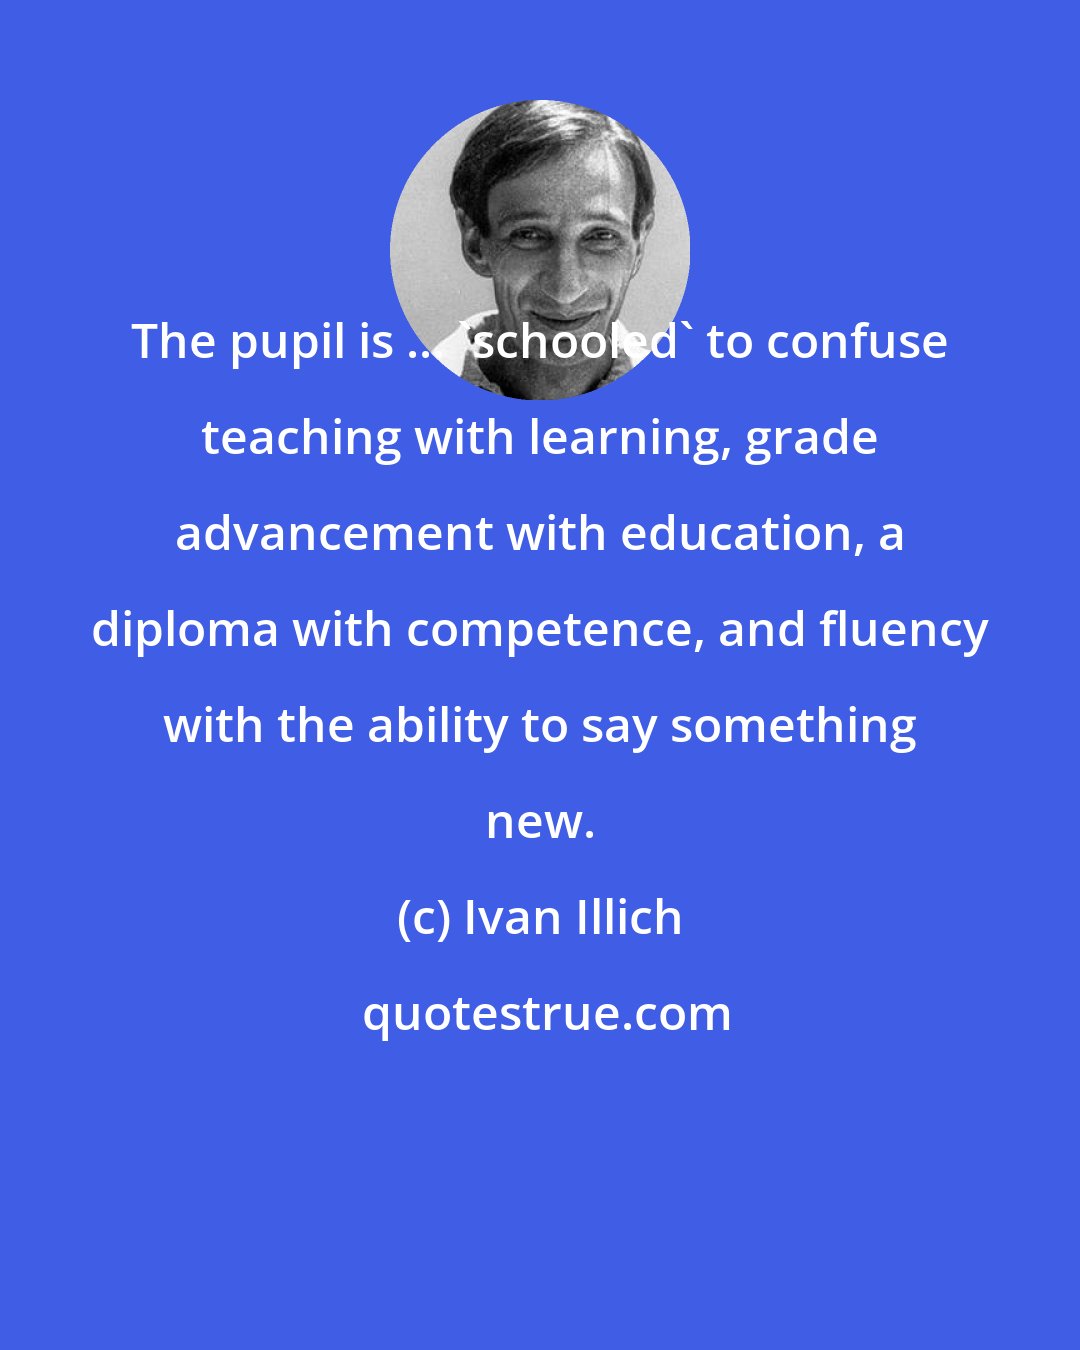 Ivan Illich: The pupil is ... 'schooled' to confuse teaching with learning, grade advancement with education, a diploma with competence, and fluency with the ability to say something new.